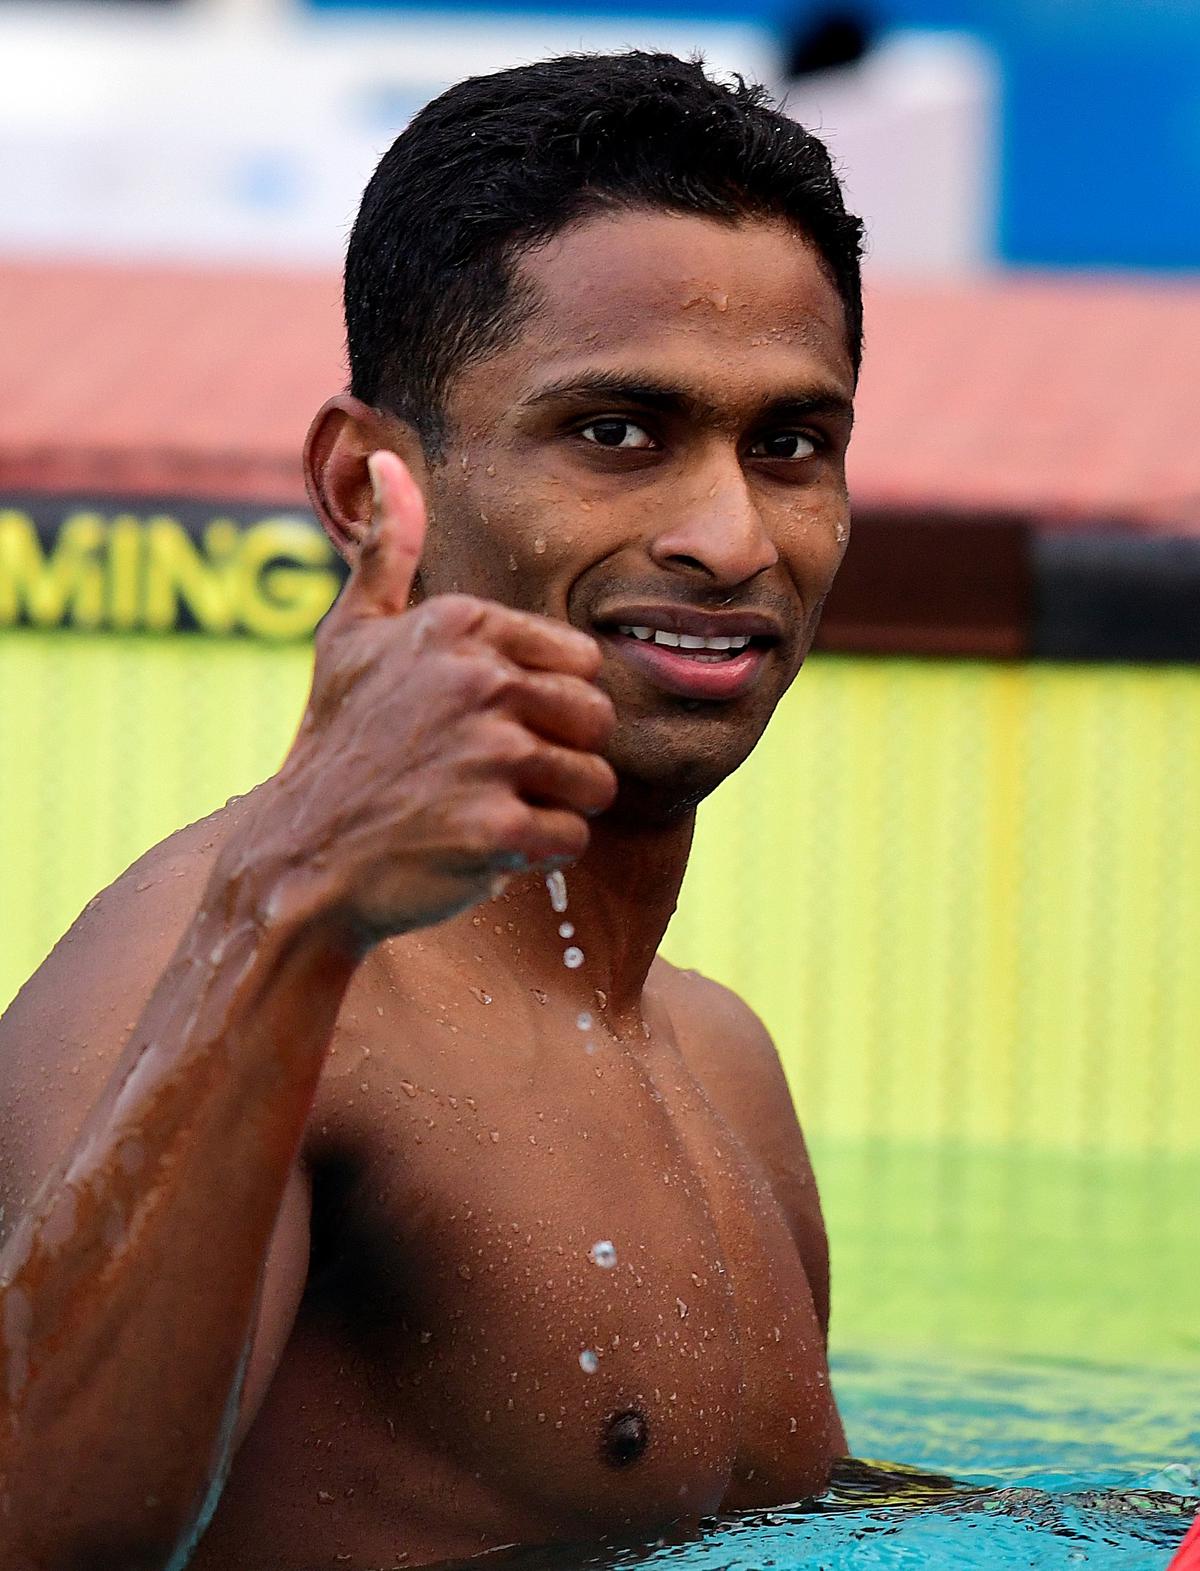 Sajan Prakash of Kerala set a new national sporting record in men's 200m medley and won 400m freestyle gold at the 36th National Games in Rajkot on Friday, October 7, 2022.